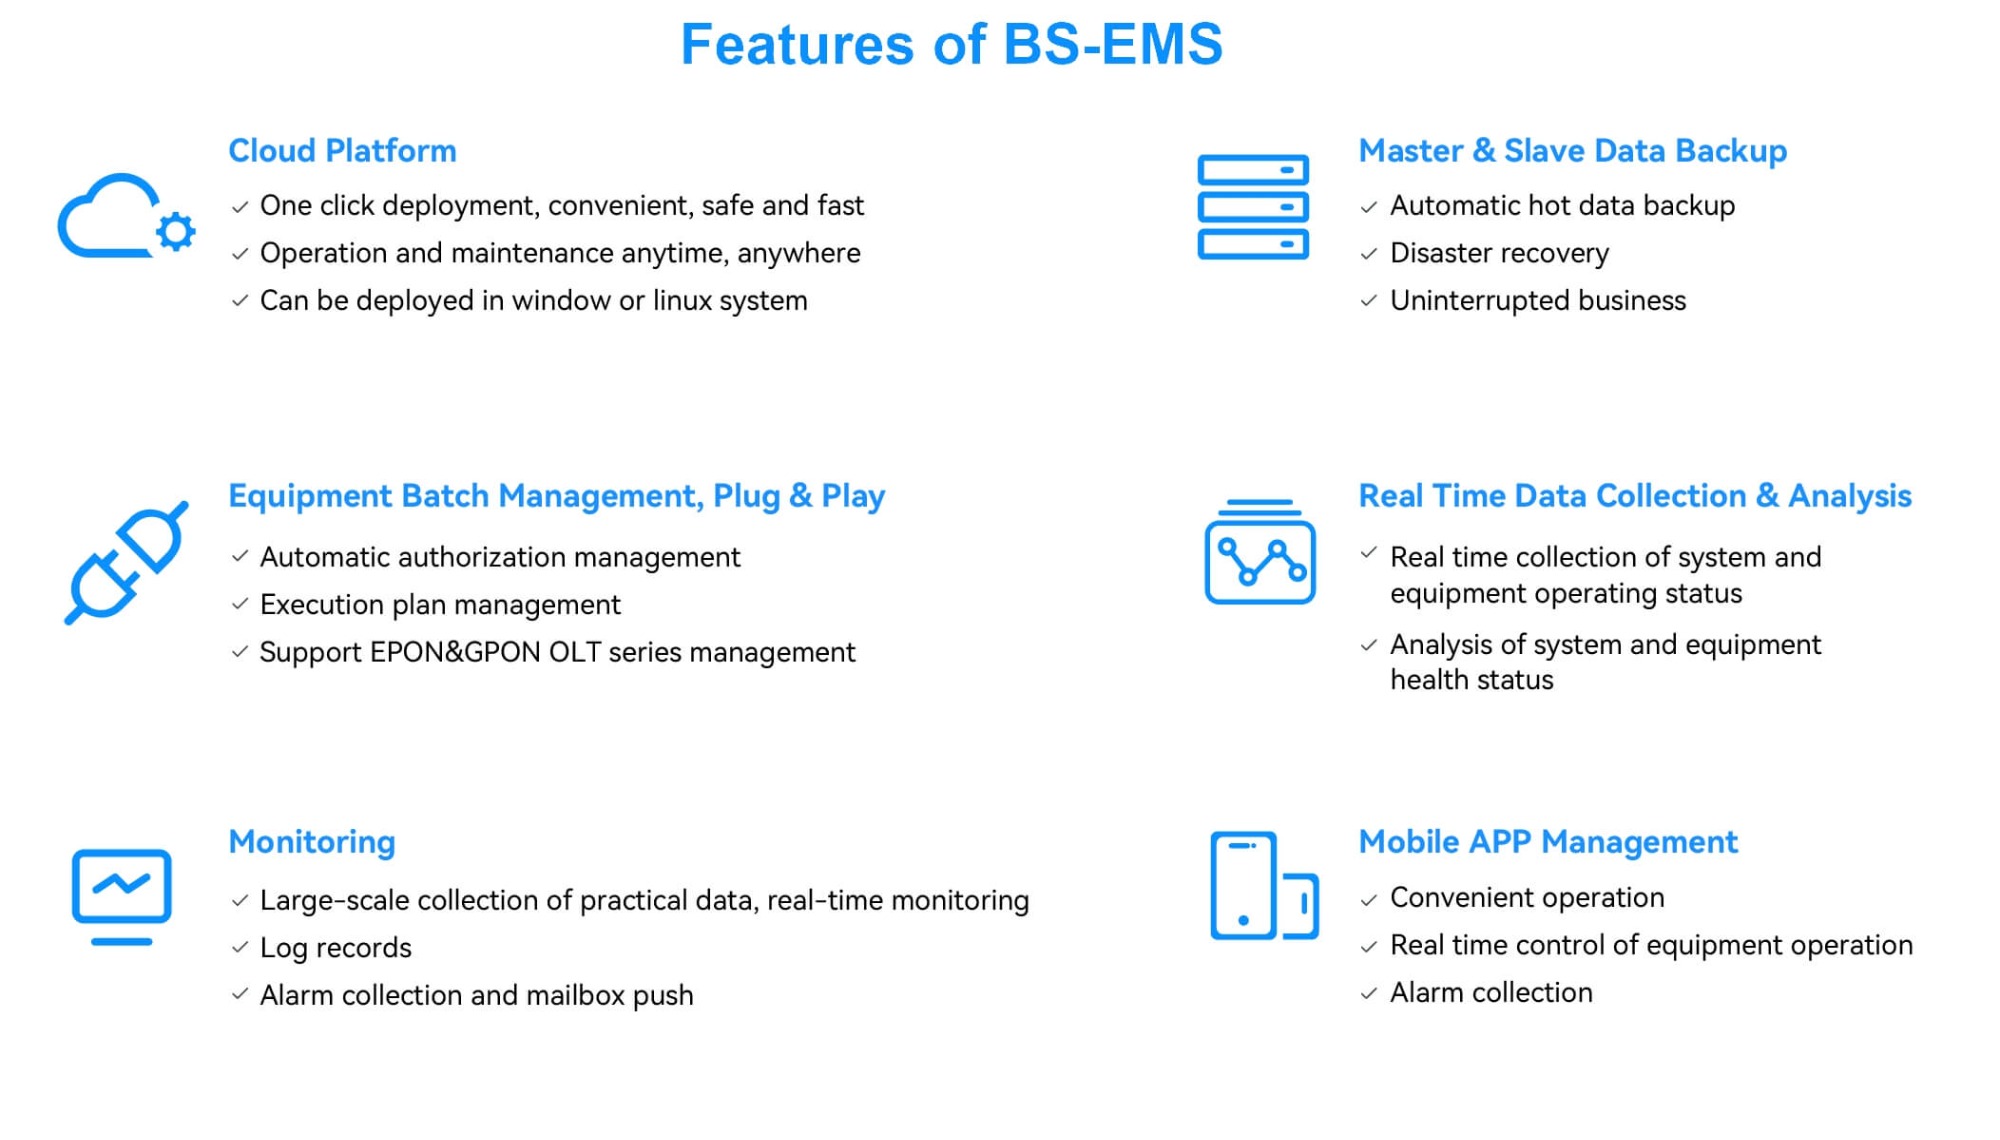 BS-EMS Features